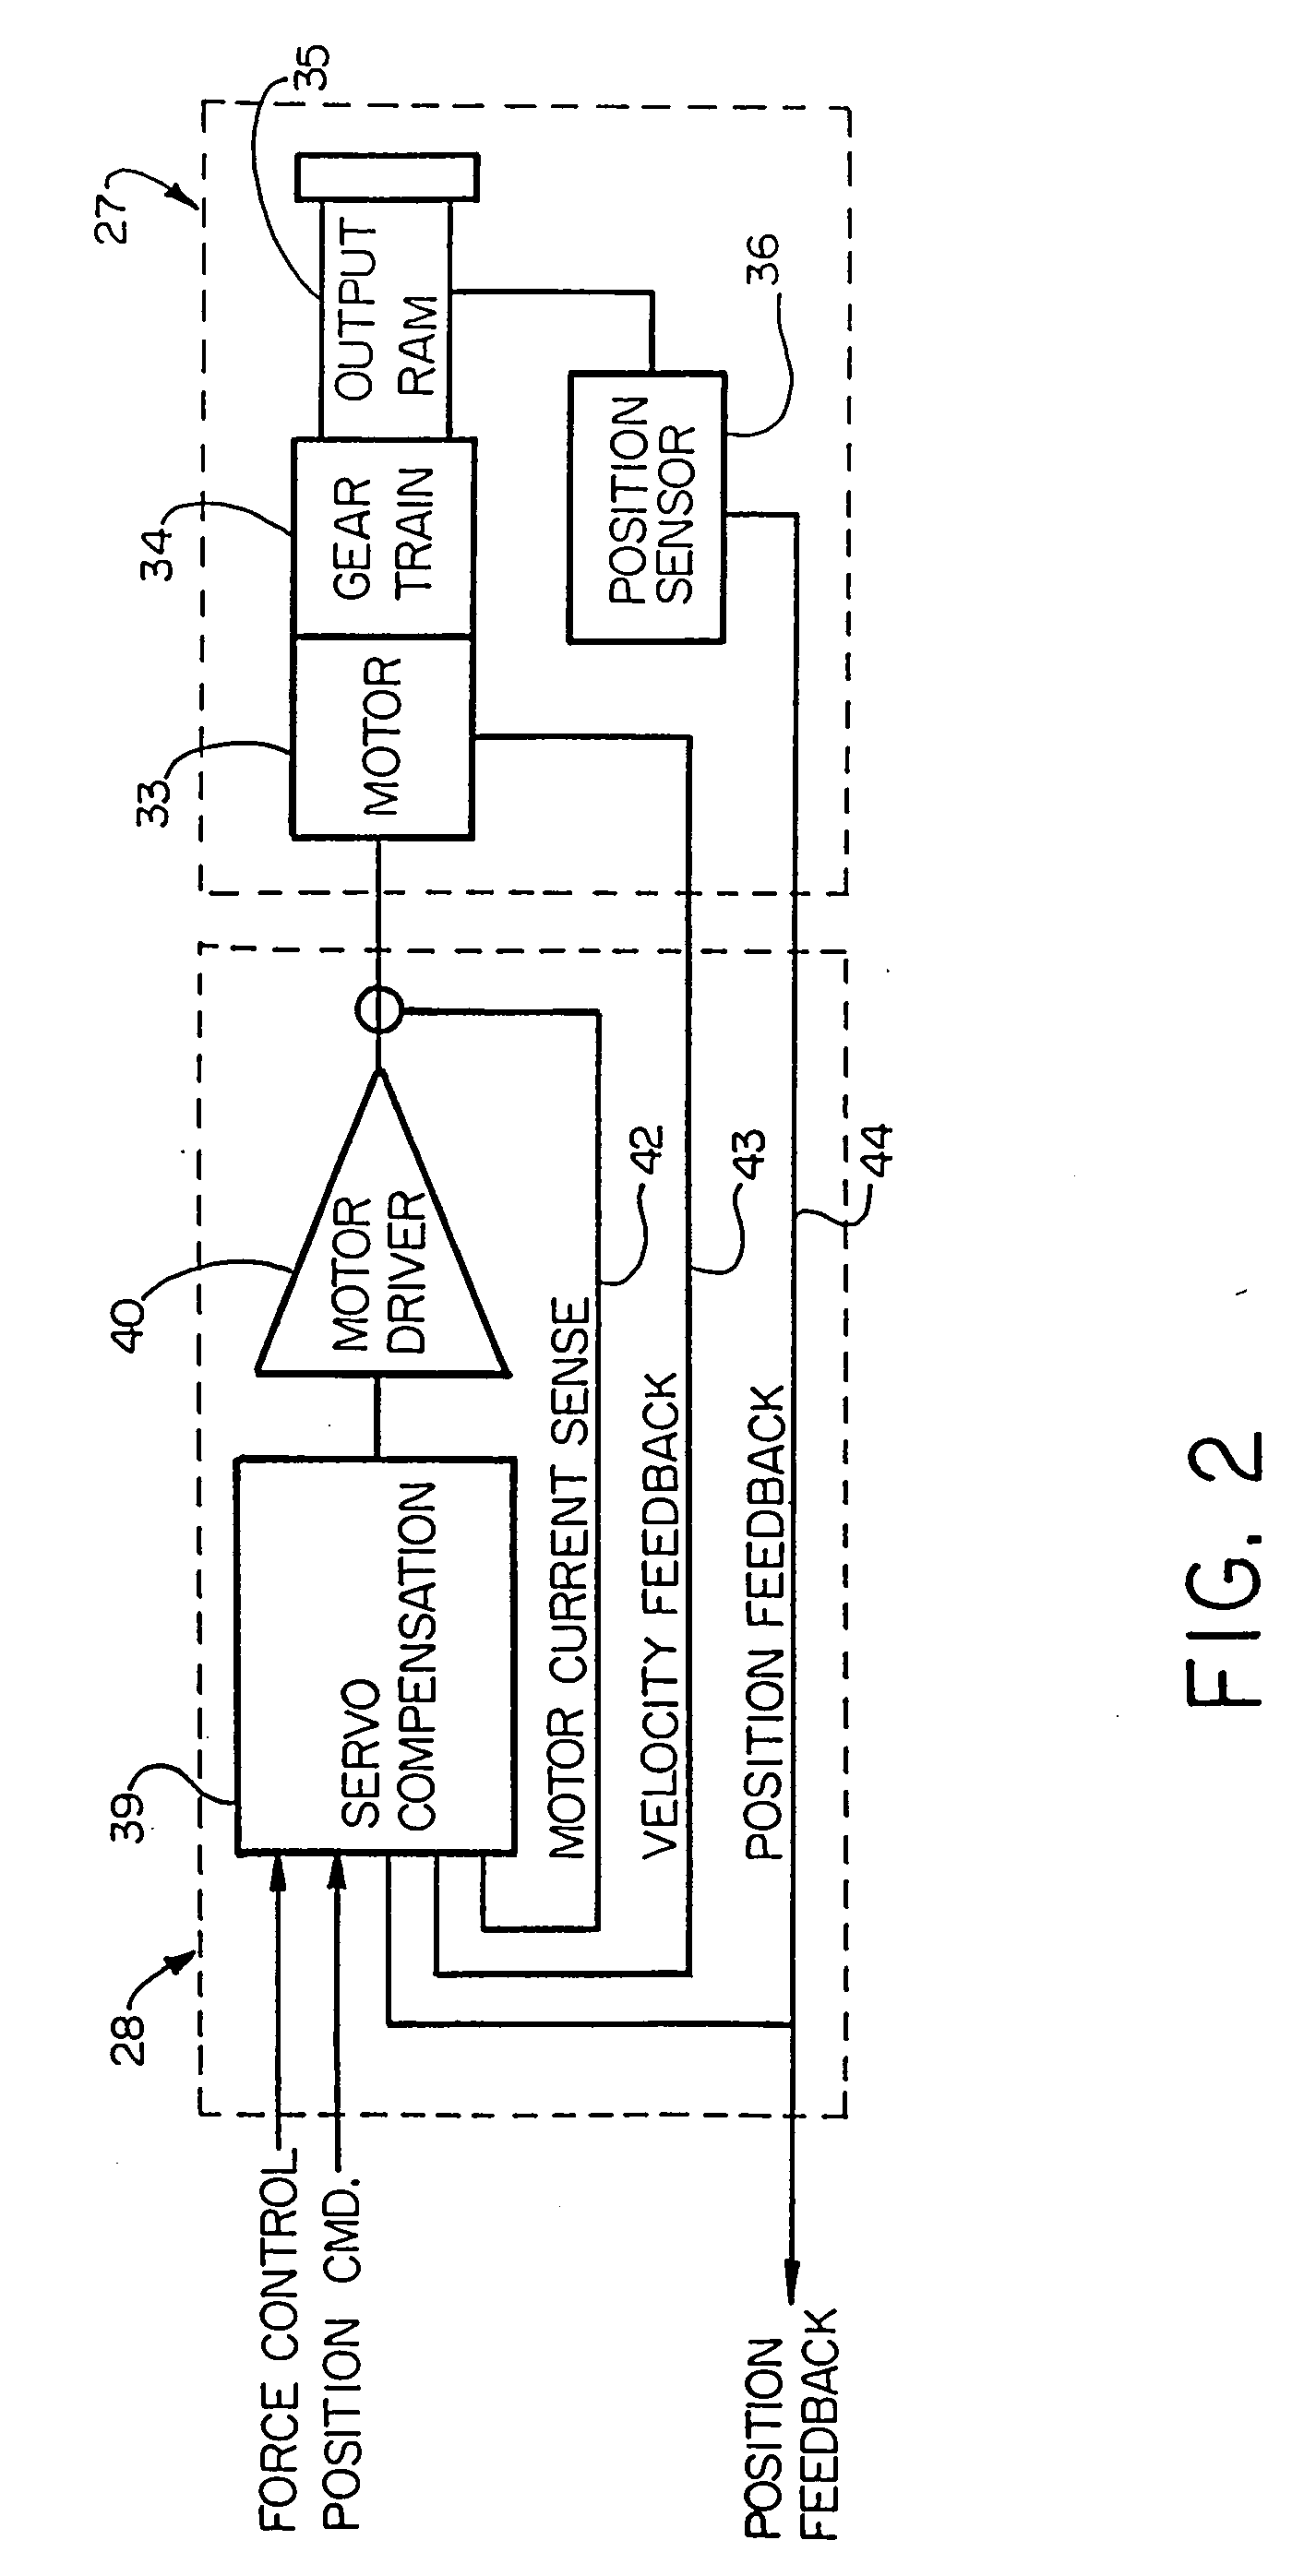 Electronic aircraft braking system with brake wear measurement, running clearance adjustment and plural electric motor- actuator ram assemblies